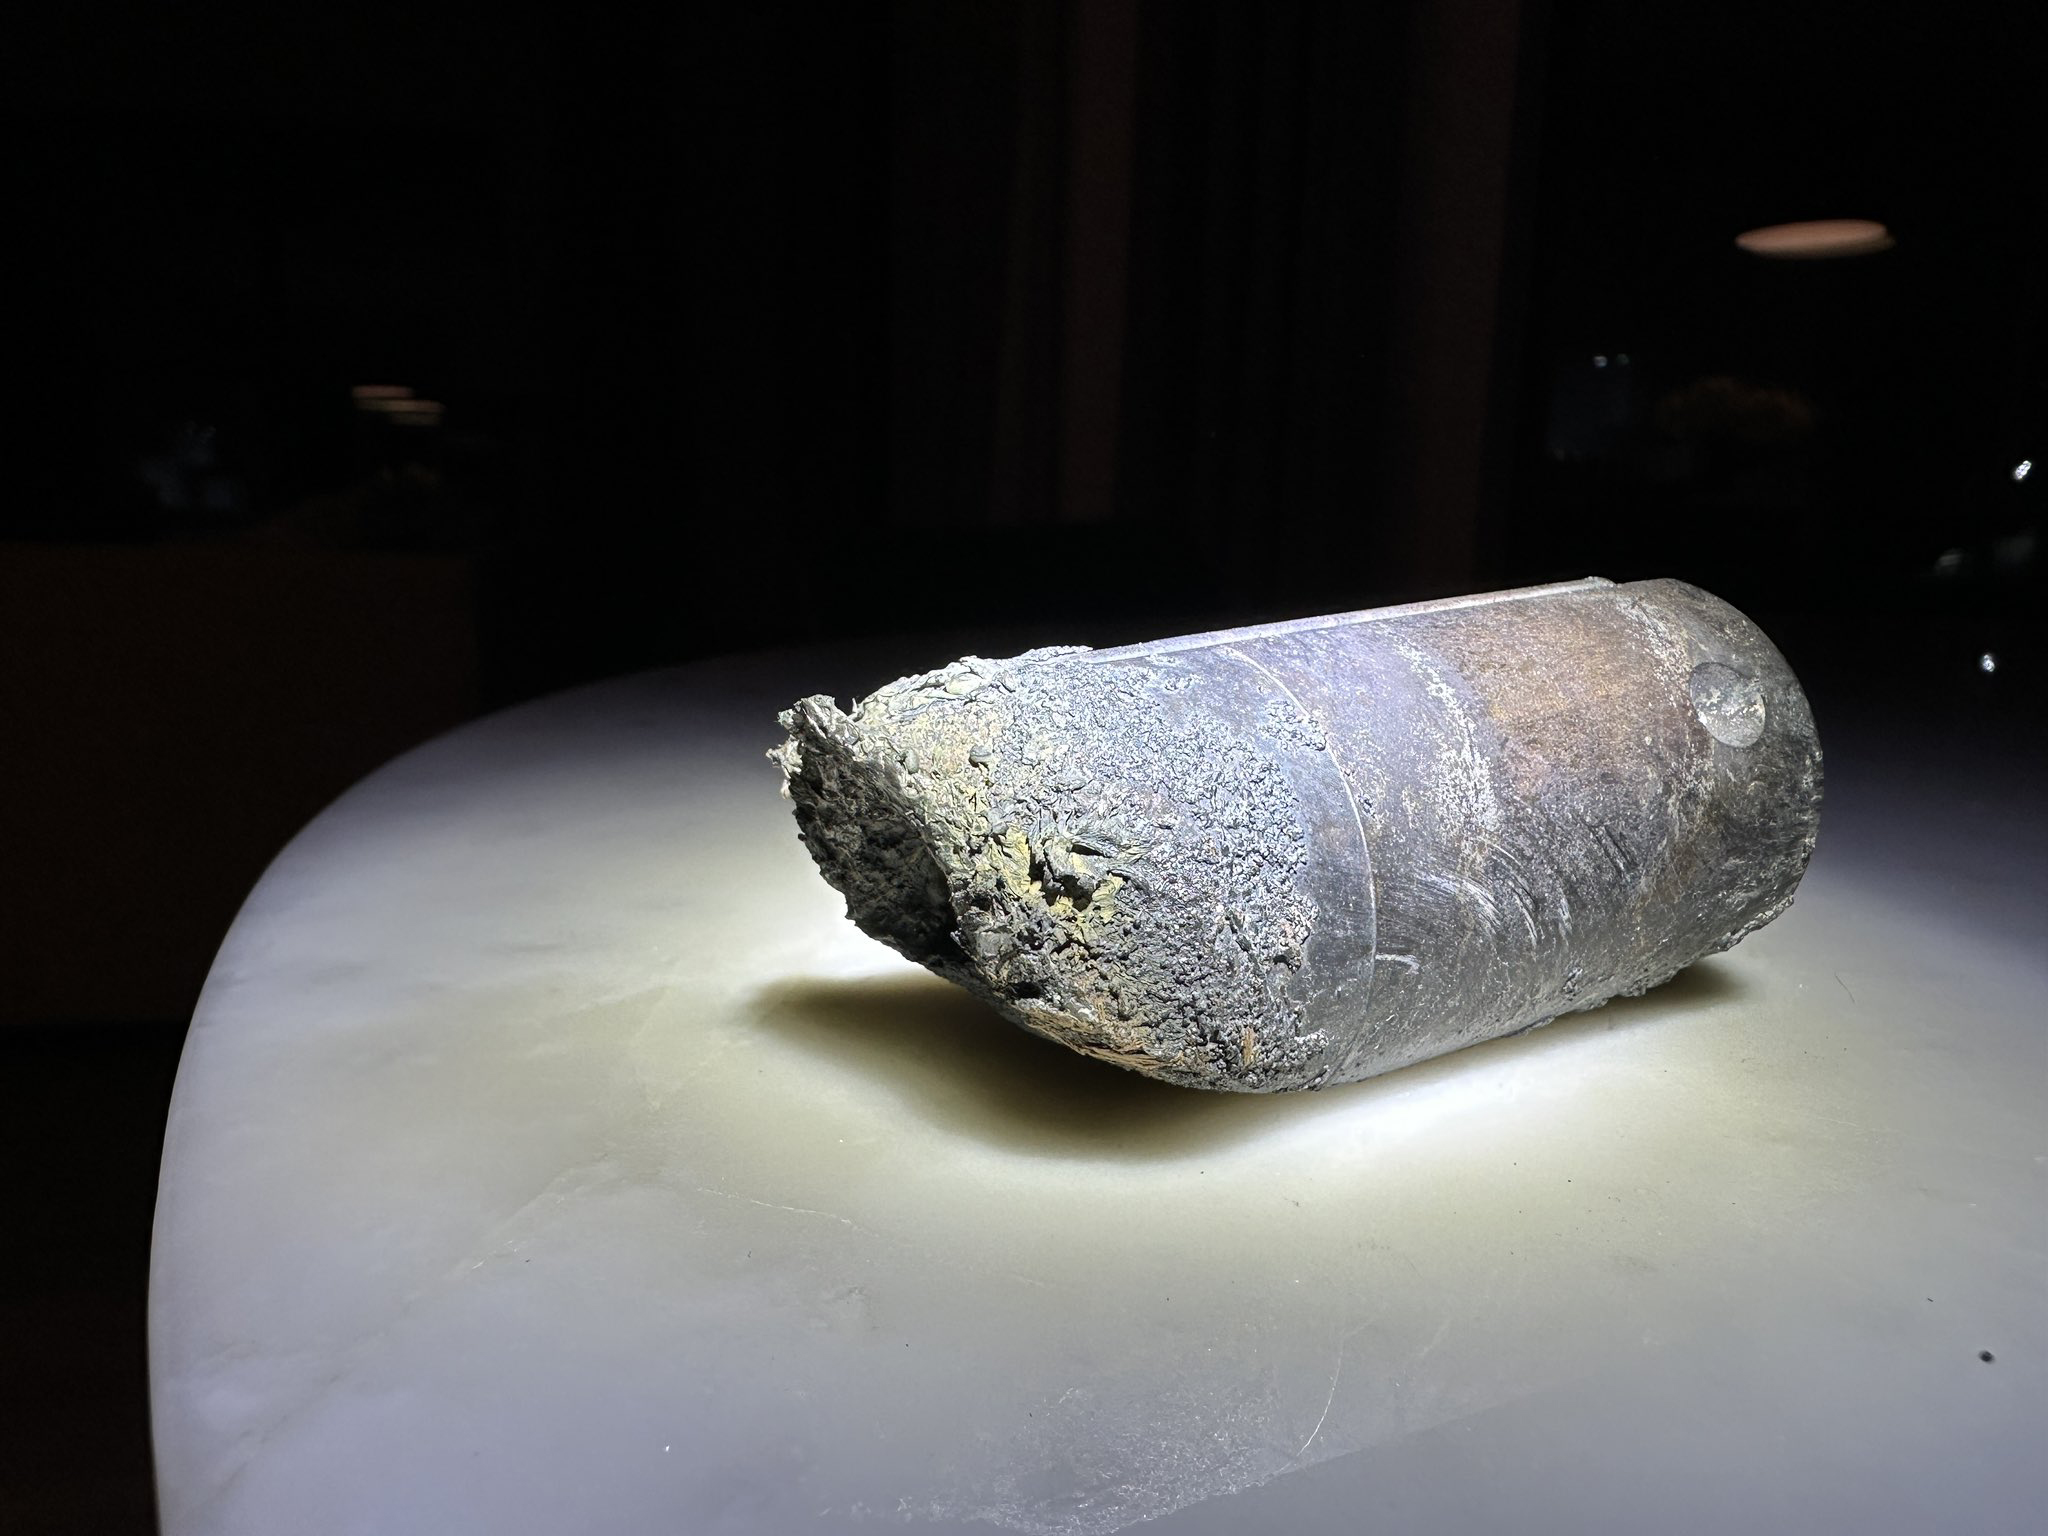 The chunk of debris is thought to be from the massive EP-9 equipment pallet that was jettisoned from the ISS for an uncontrolled landing over Earth in early March